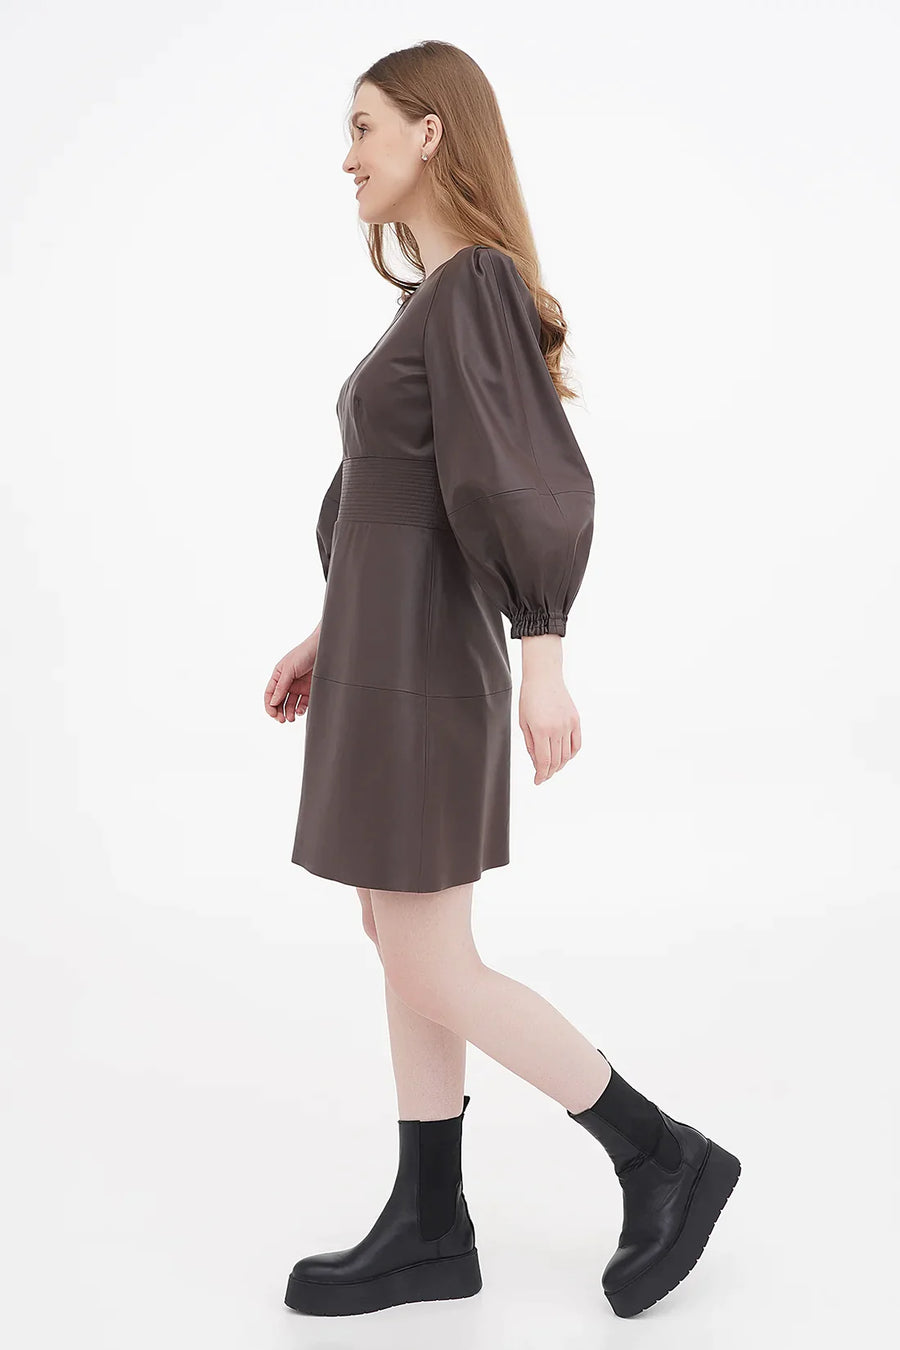 A Model Wearing Brown Organic Cotton Long sleeve organic vegan leather dress, curated by Only Ethikal